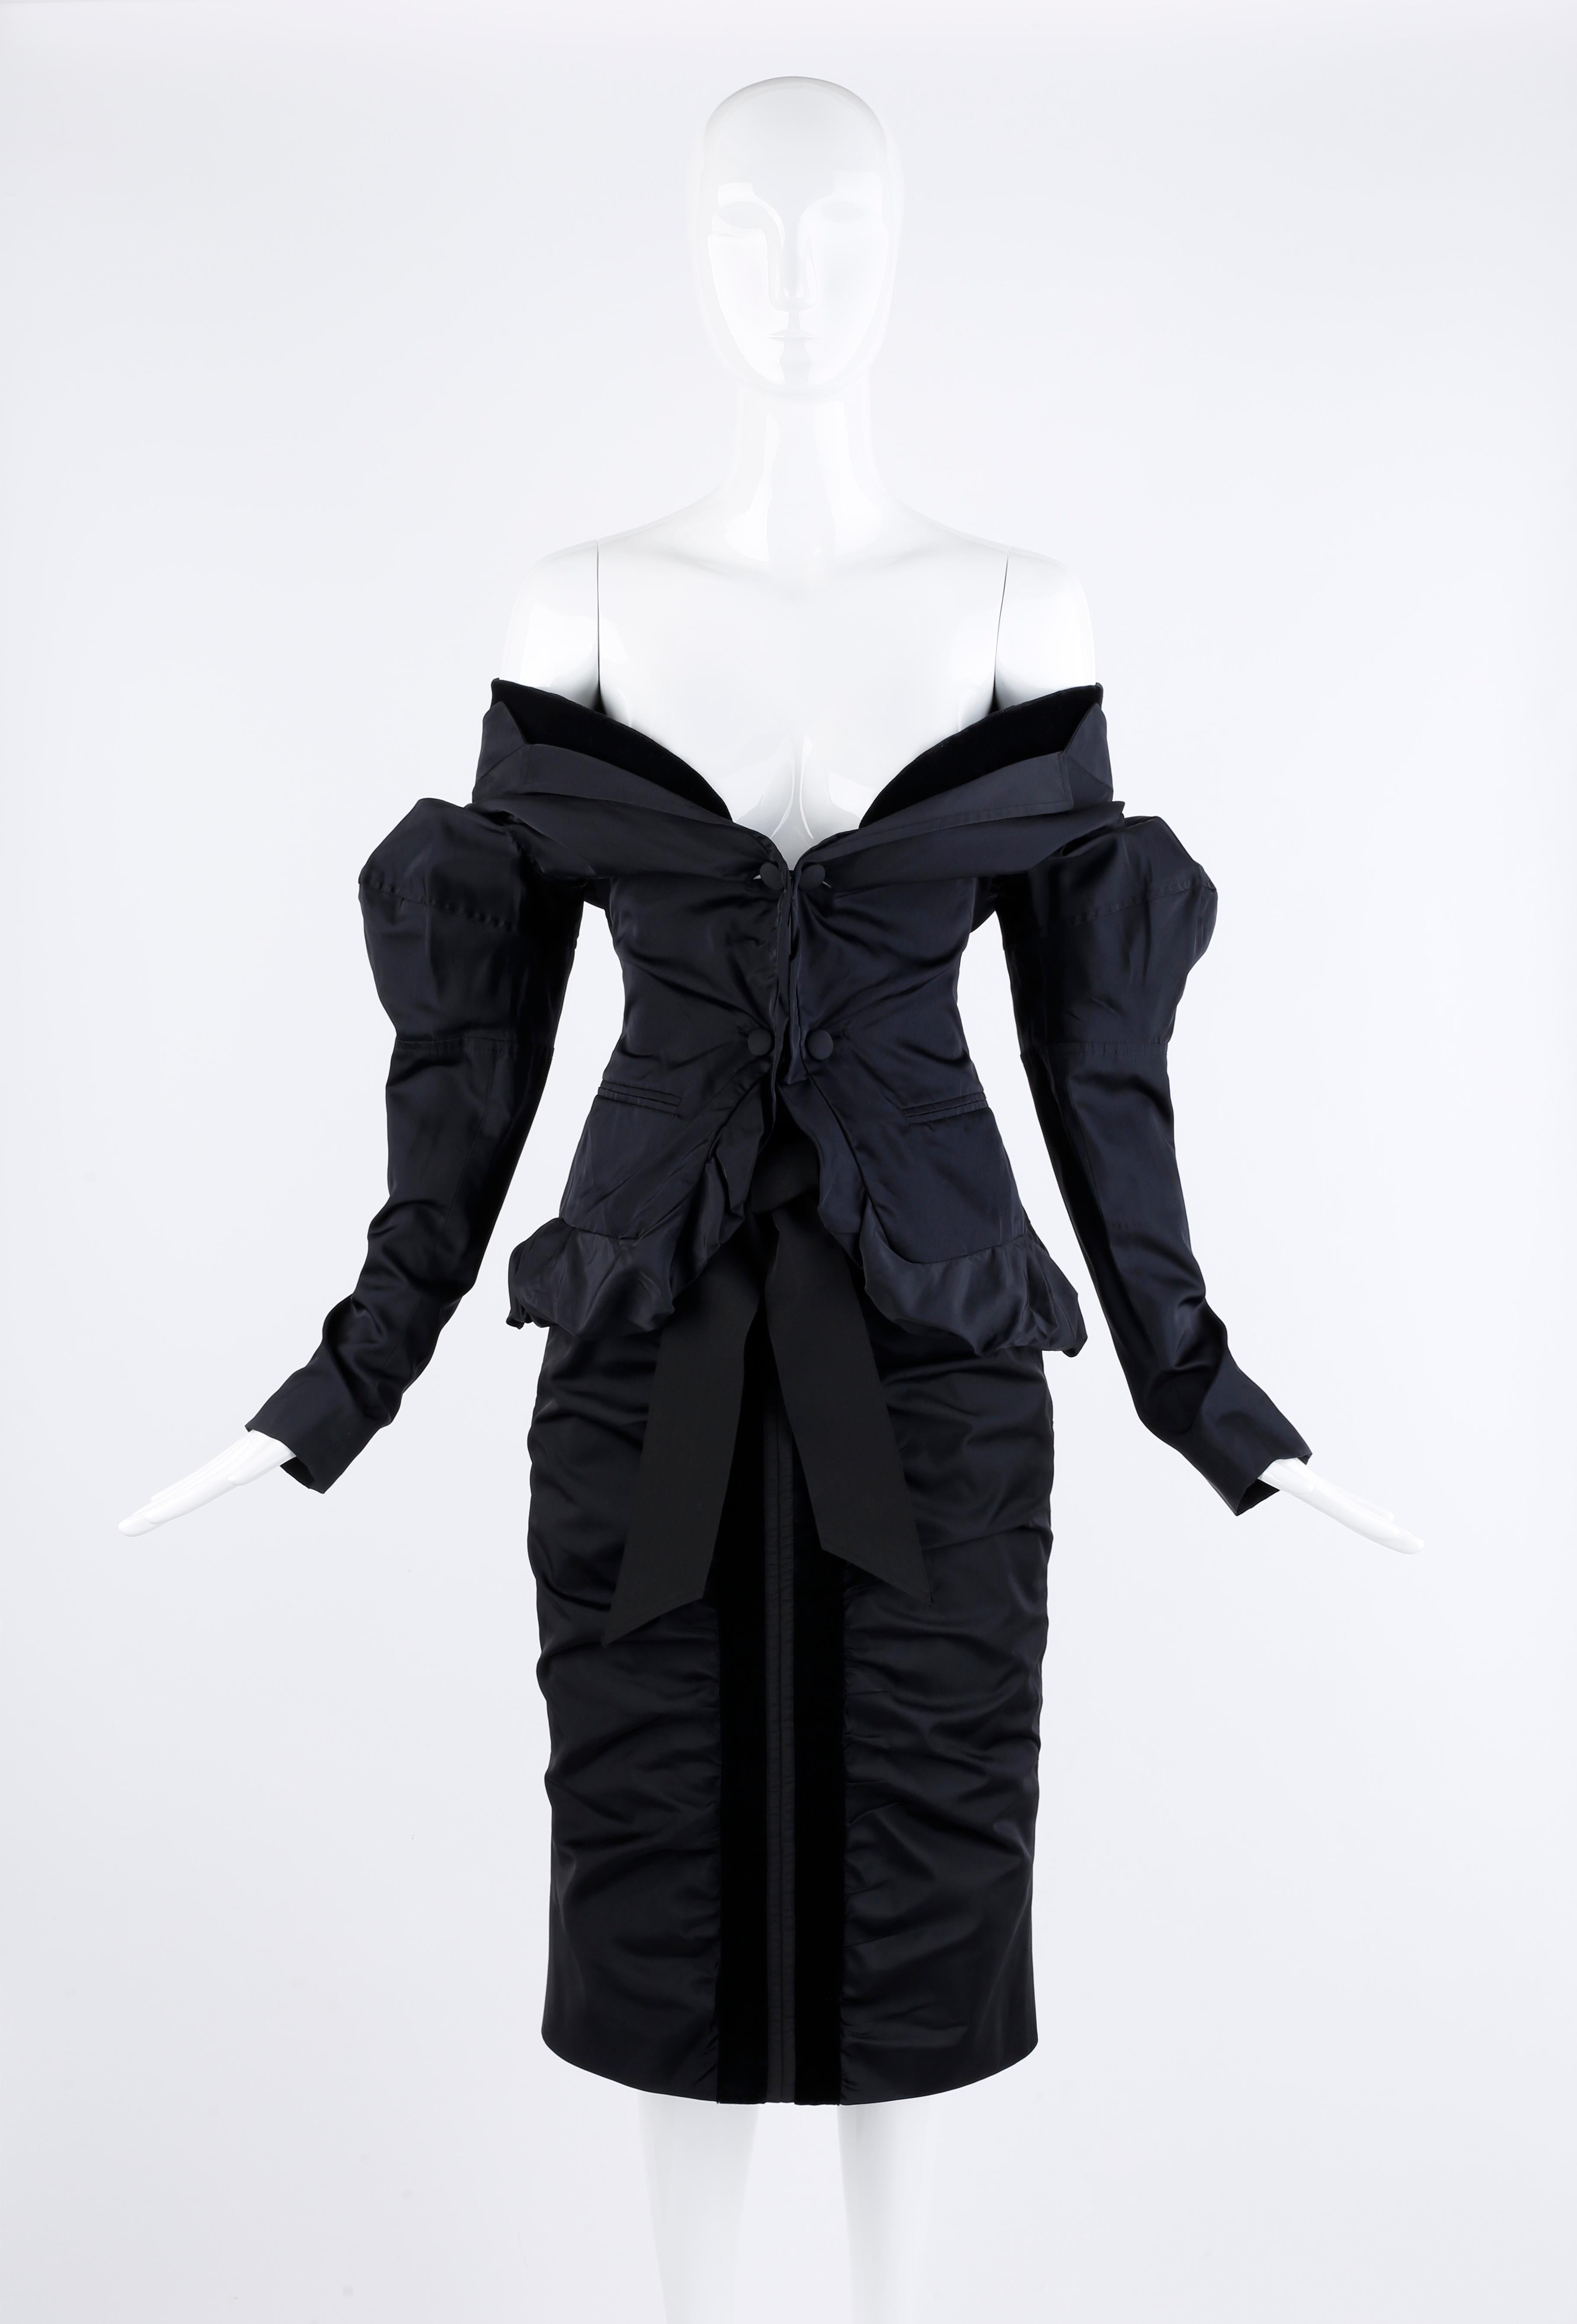 Yves Saint Laurent by Tom Ford F/W 2002 Black Silk Evening Jacket & Skirt Suit For Sale 1